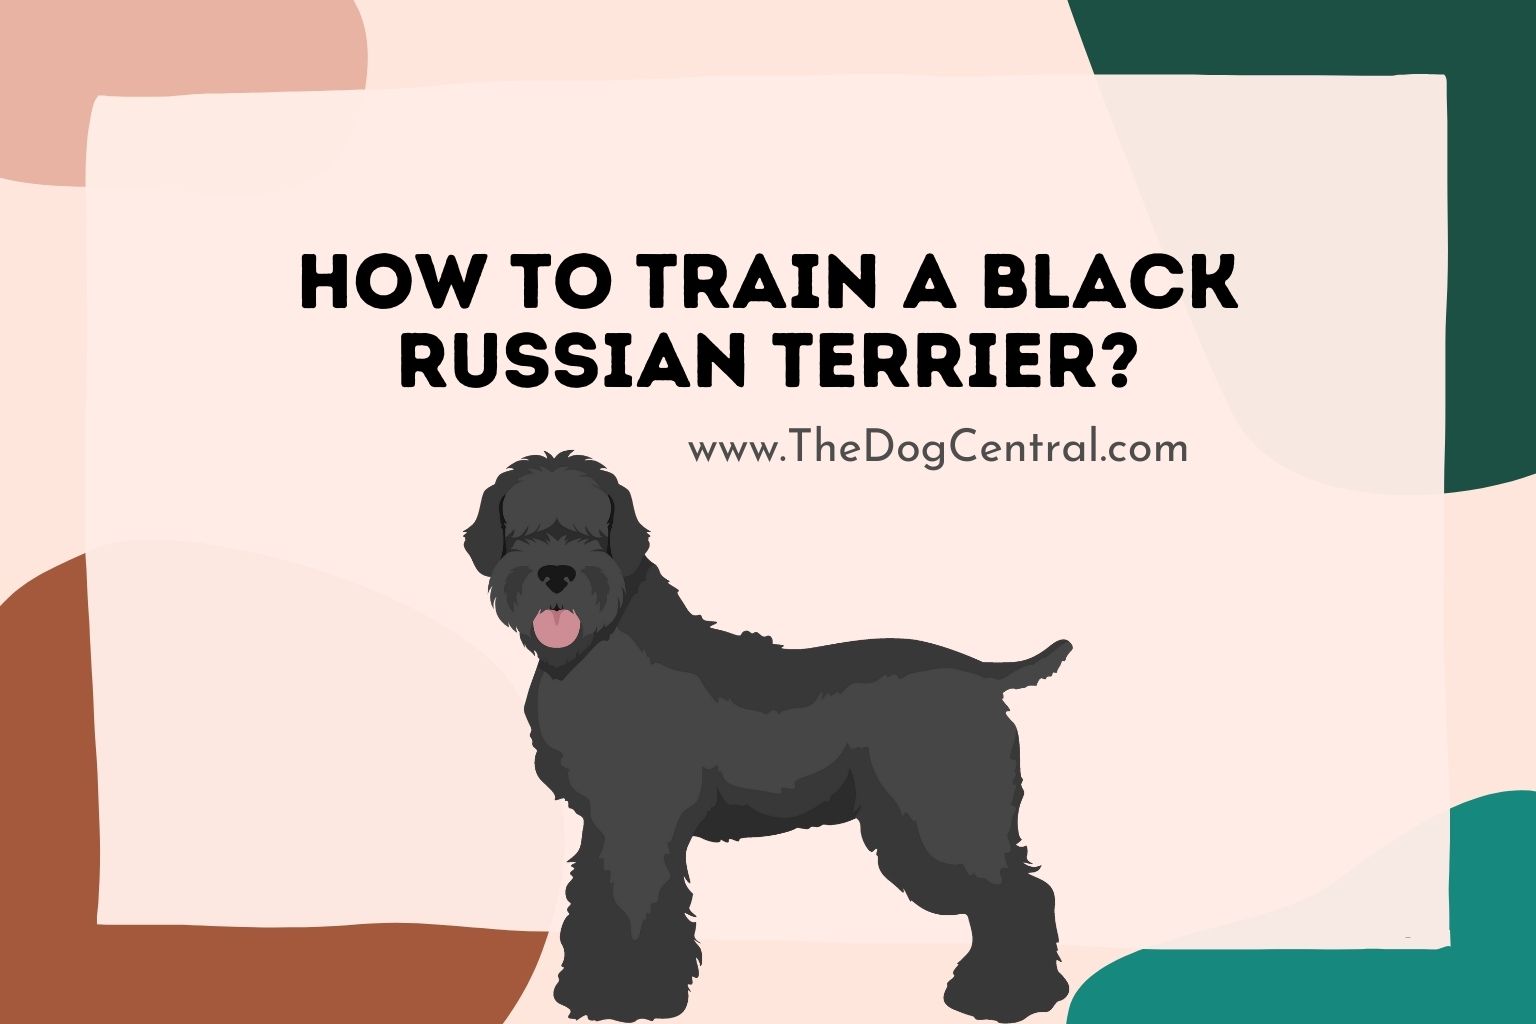 How to train a Black Russian Terrier